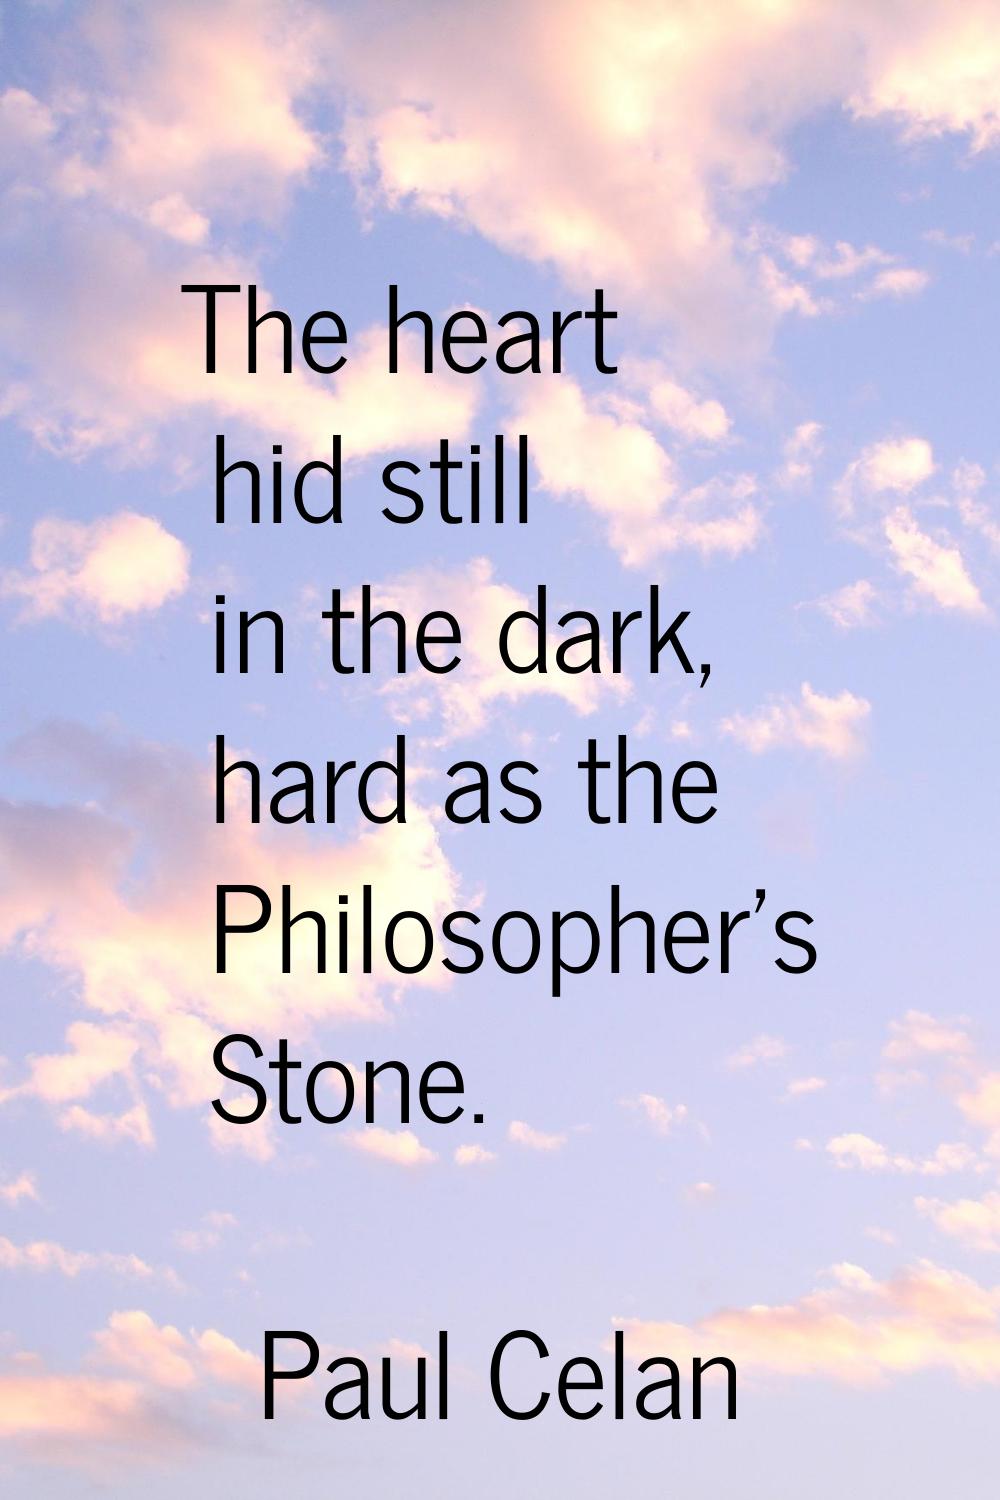 The heart hid still in the dark, hard as the Philosopher's Stone.